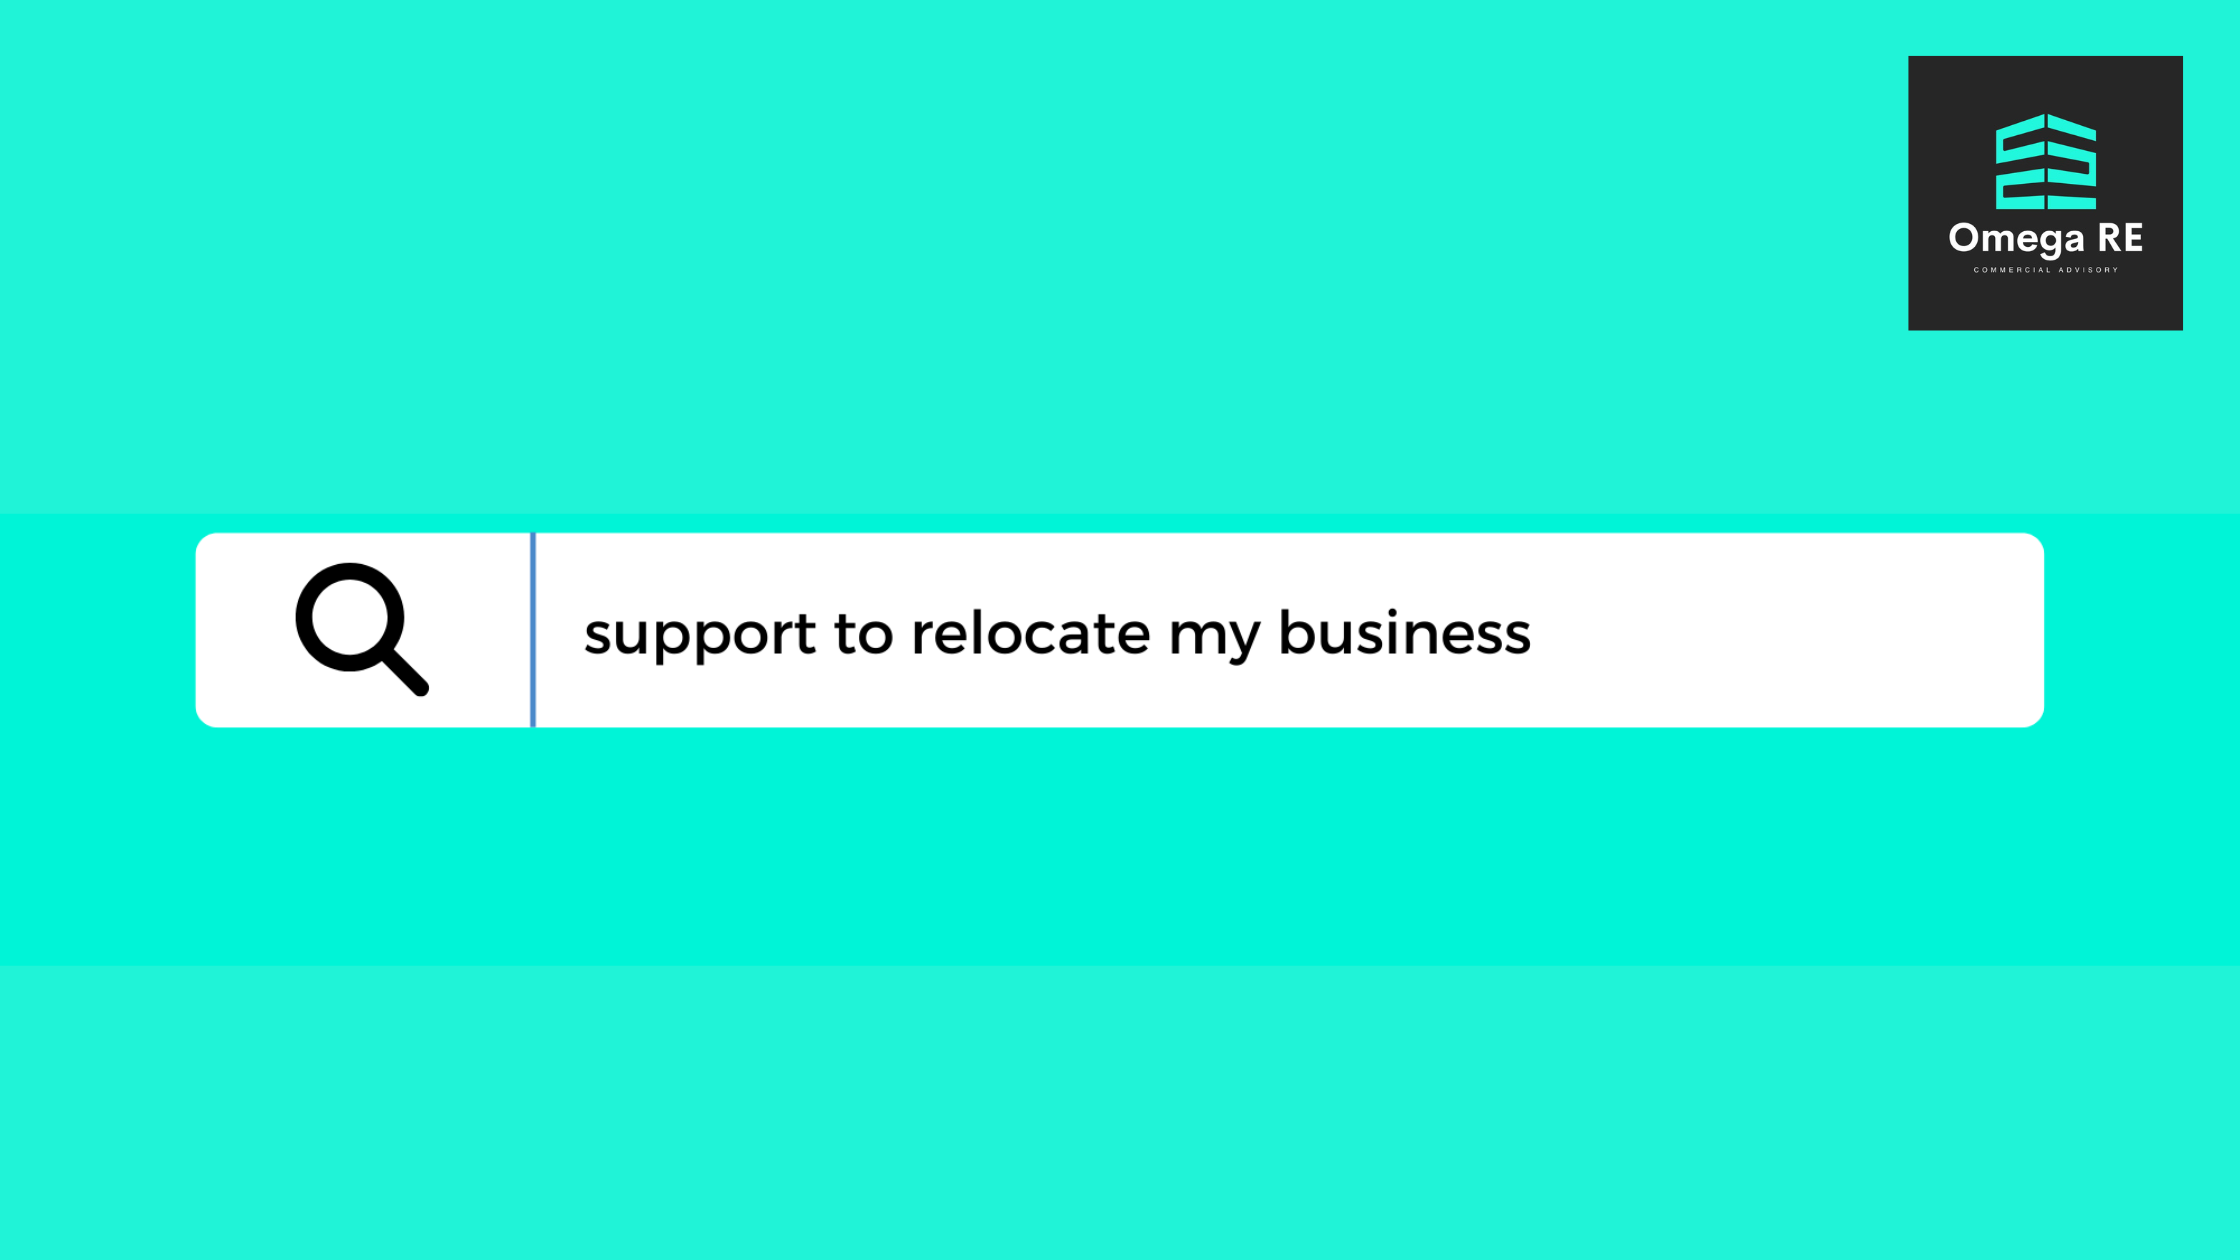 Support to relocate my business